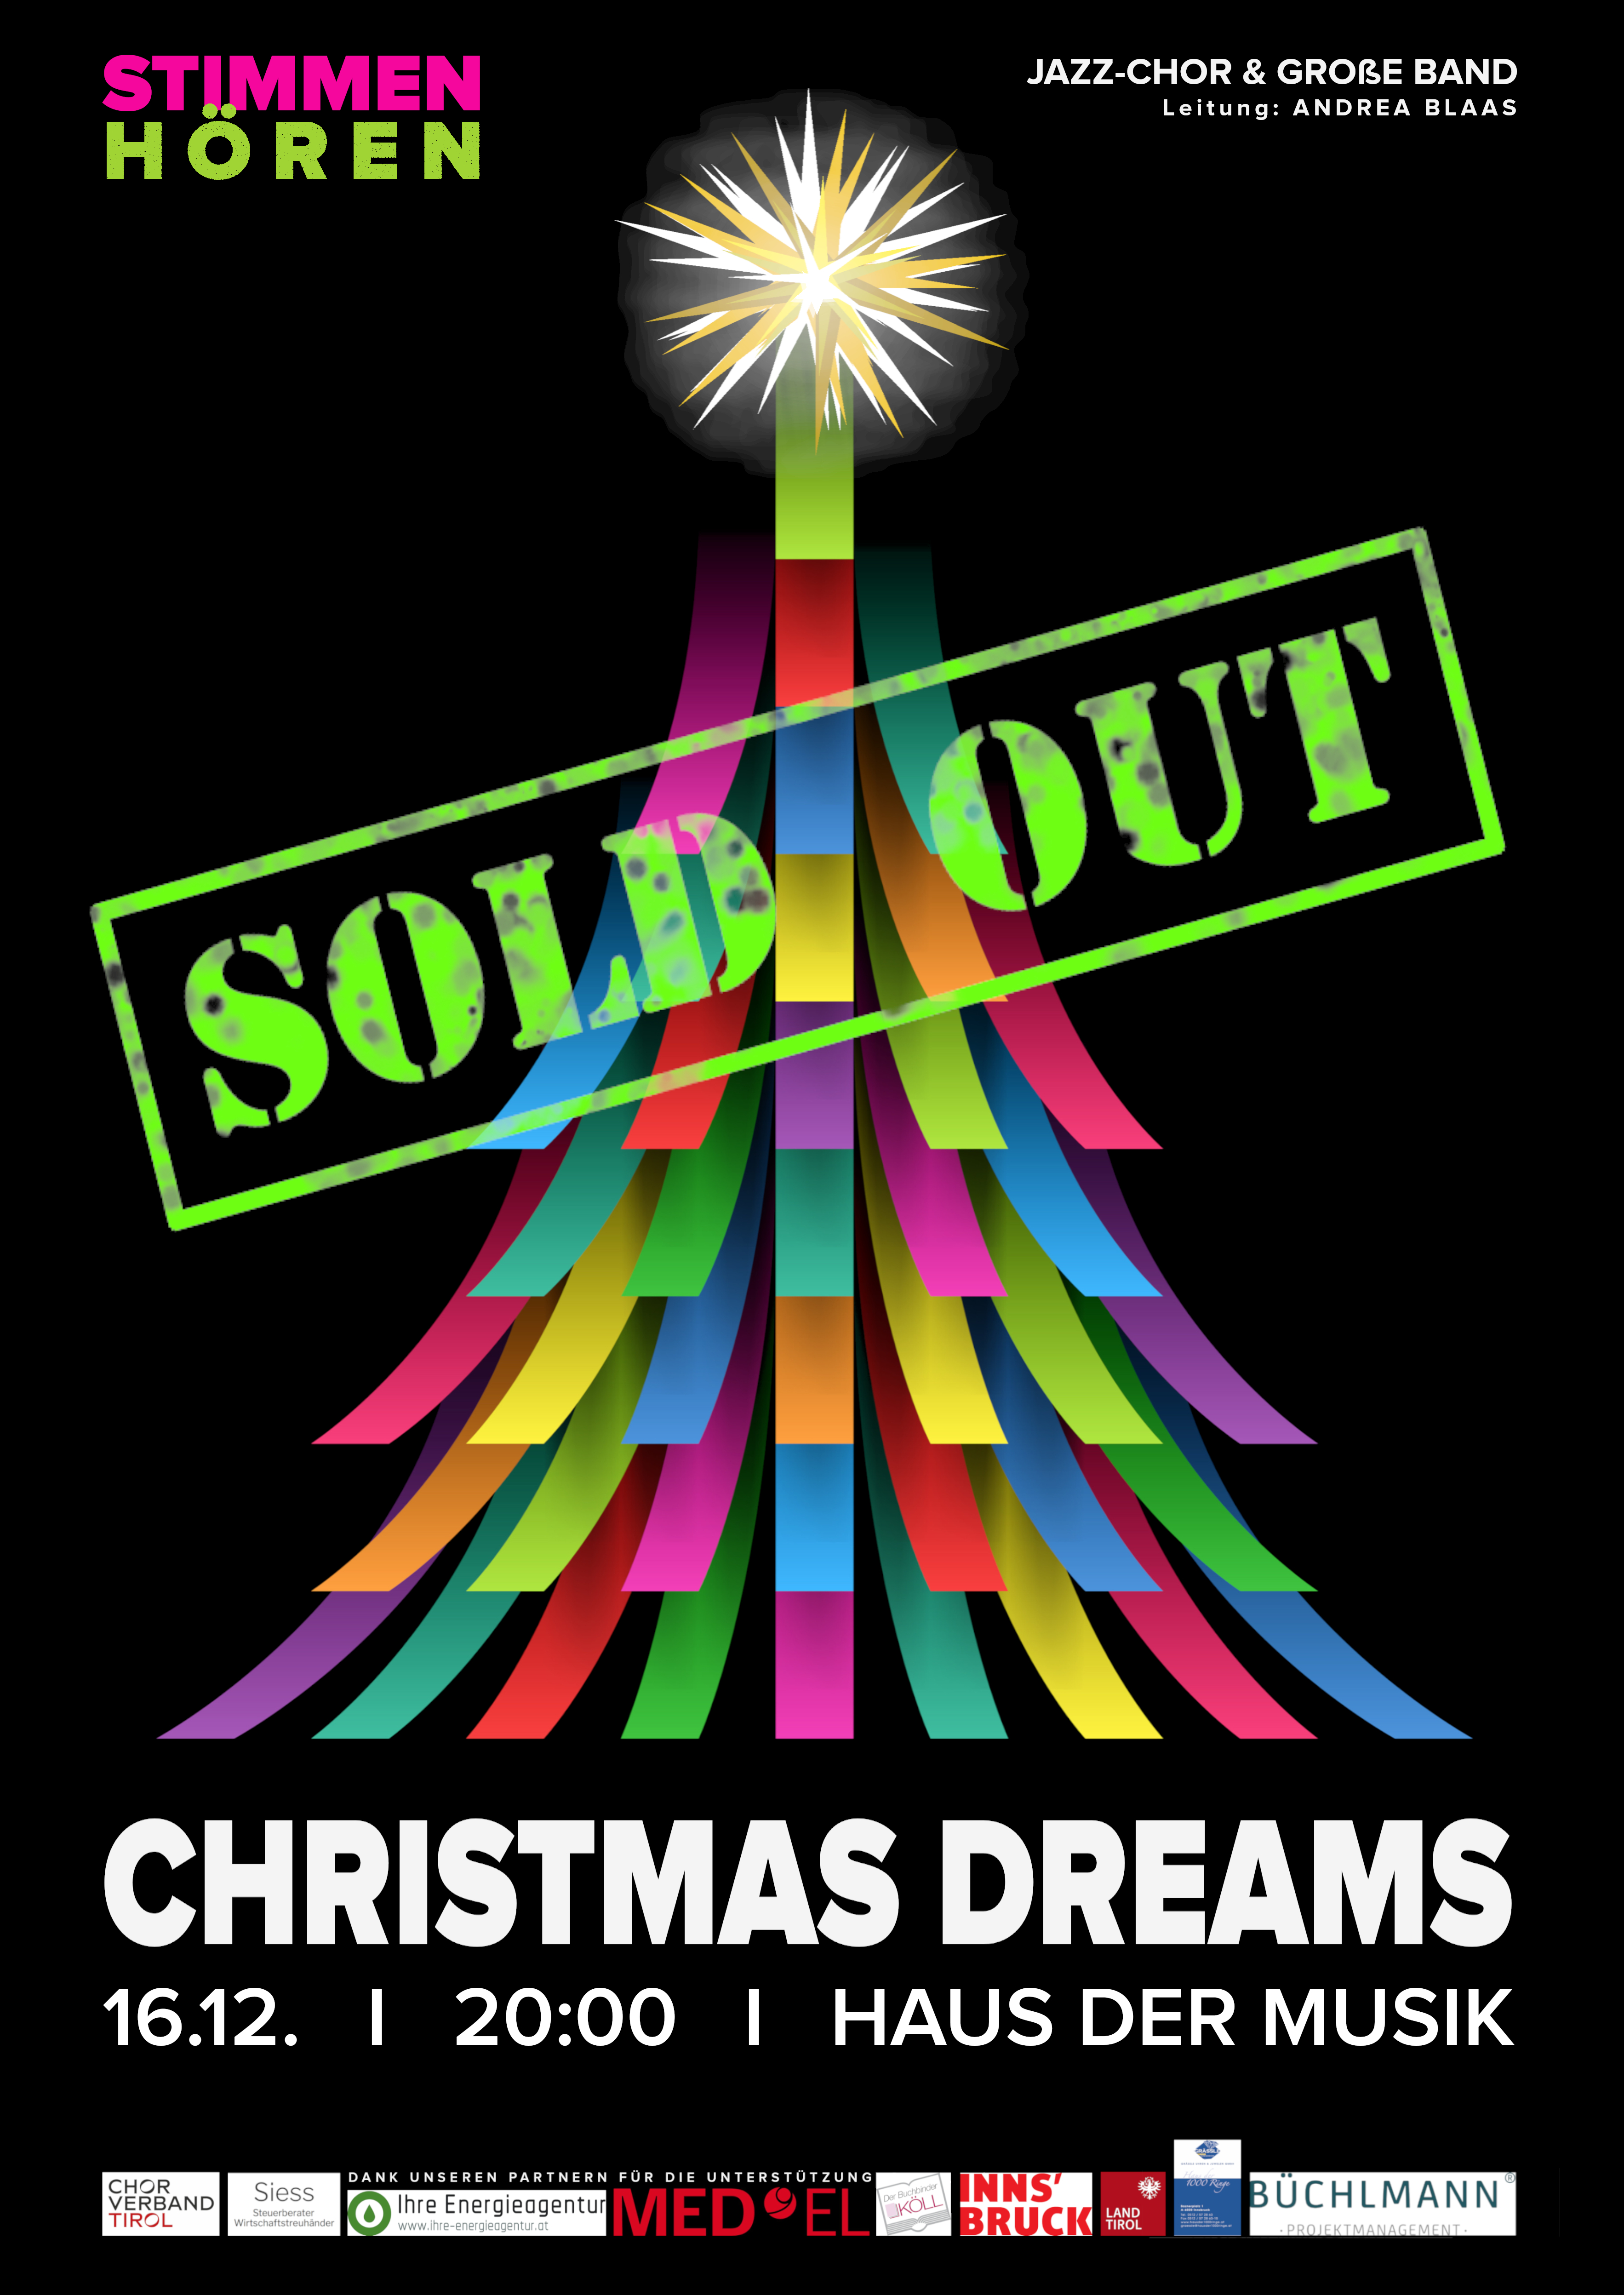 CHRISTMAS DREAMS - Sold out